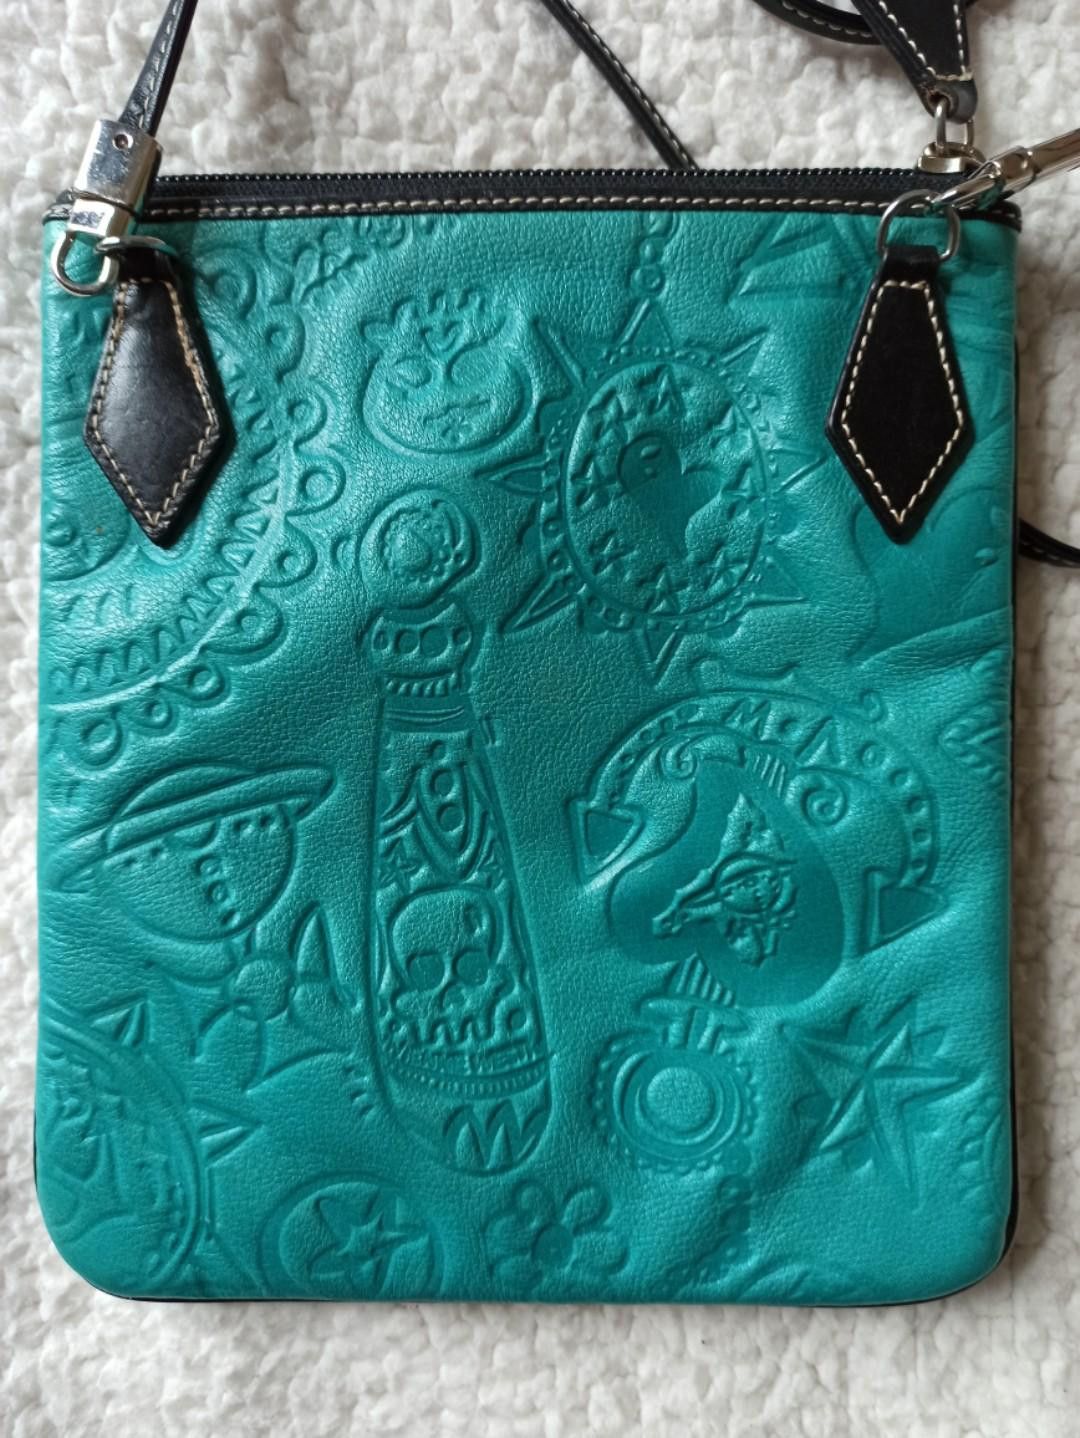 Vivienne Westwood Vivienne Westwood Teal green cross body bag Size ONE SIZE - 3 Thumbnail